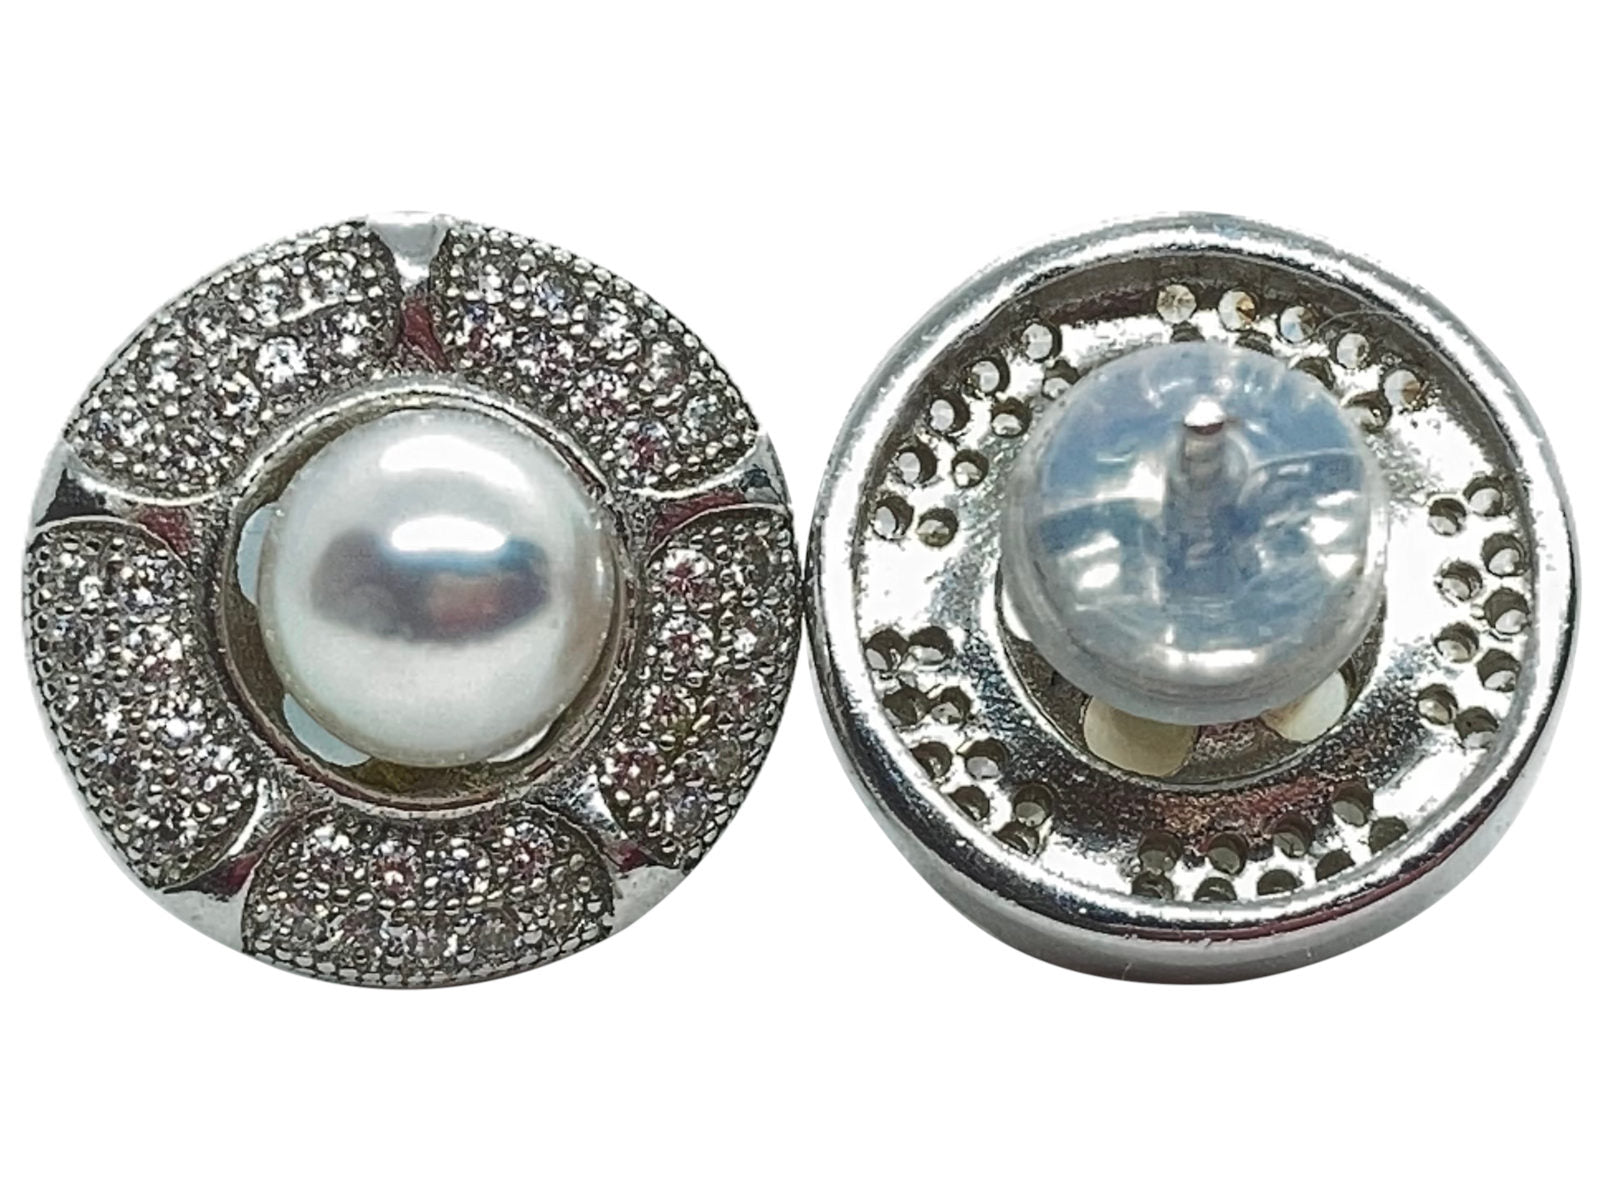 Japanese Akoya Pearl Stud Earrings Ornate Style Base On Sterling Silver With Cubic Zirconia Front And Back View Alternative